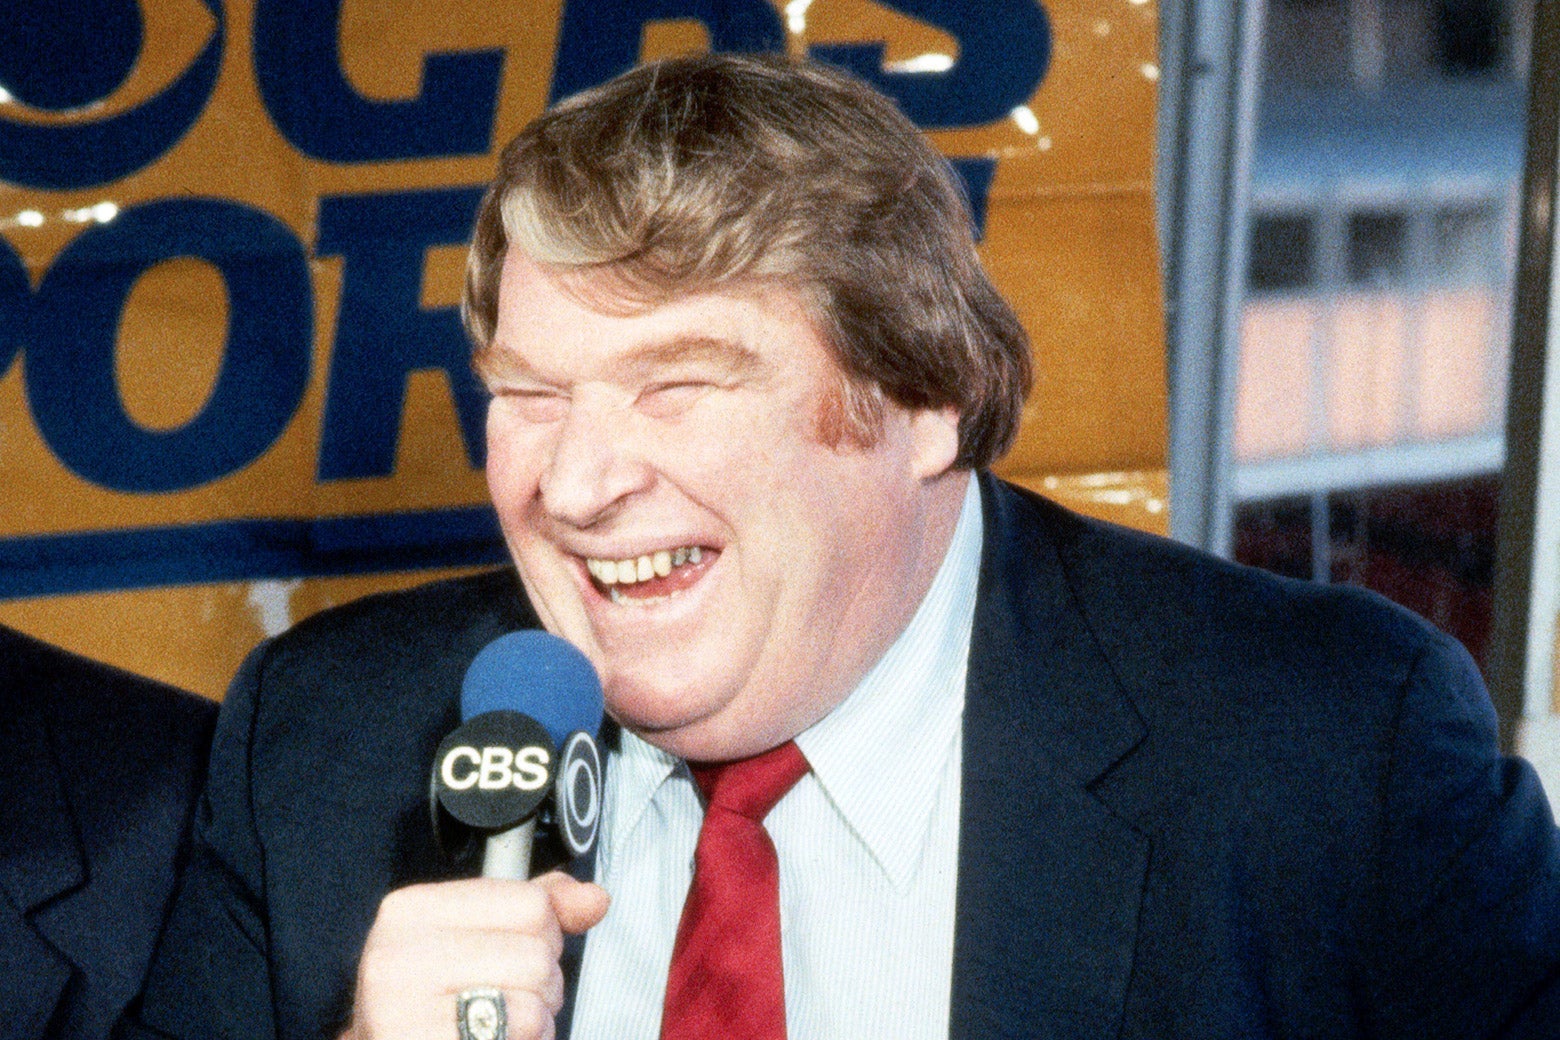 A jolly John Madden with a CBS microphone in hand.